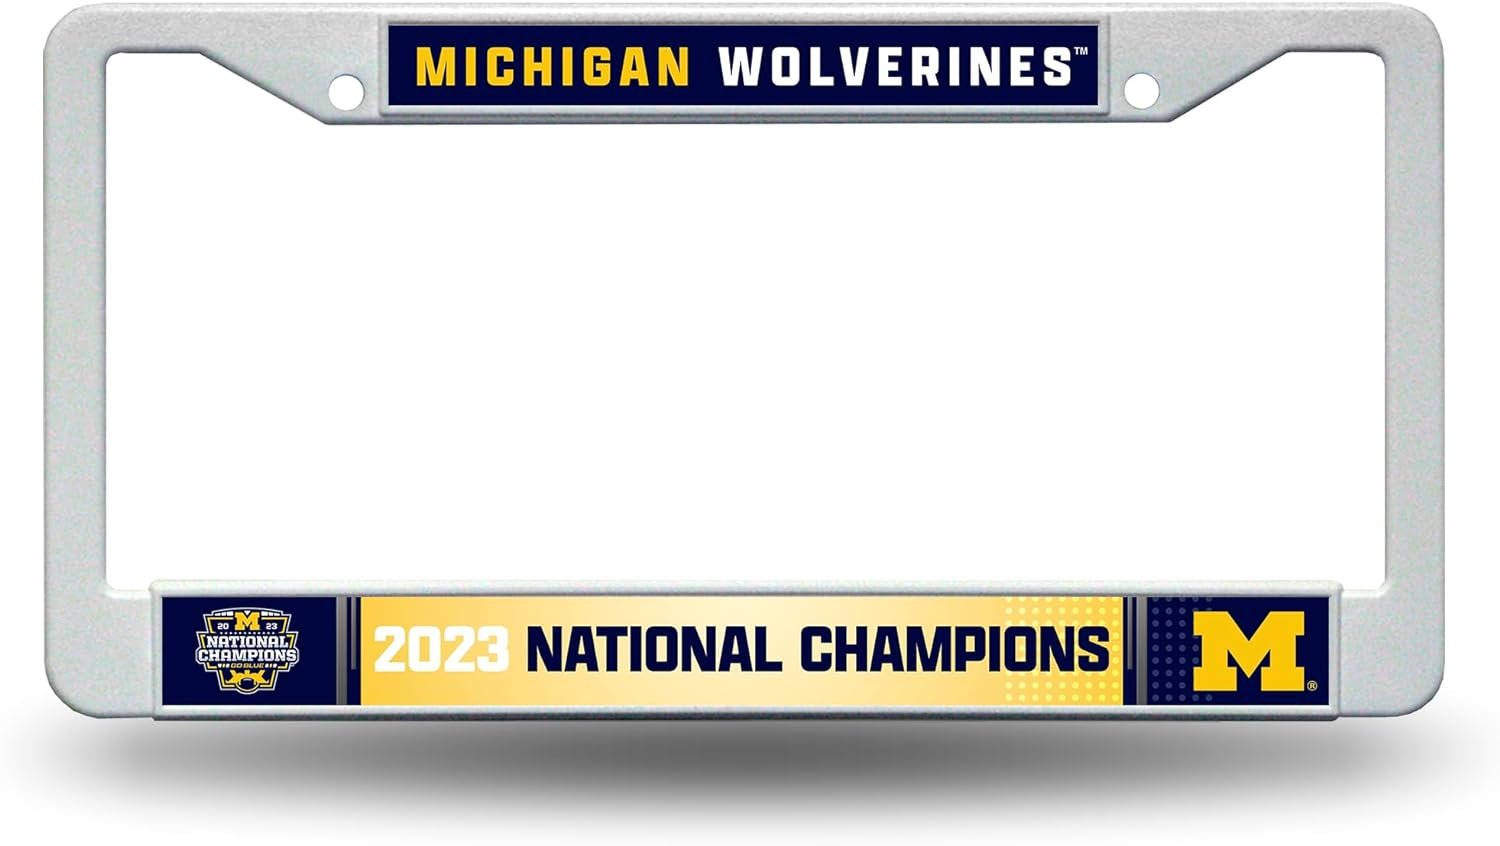 University of Michigan Wolverines 2024 Champions Plastic License Plate Frame Tag Cover, 12x6 Inch